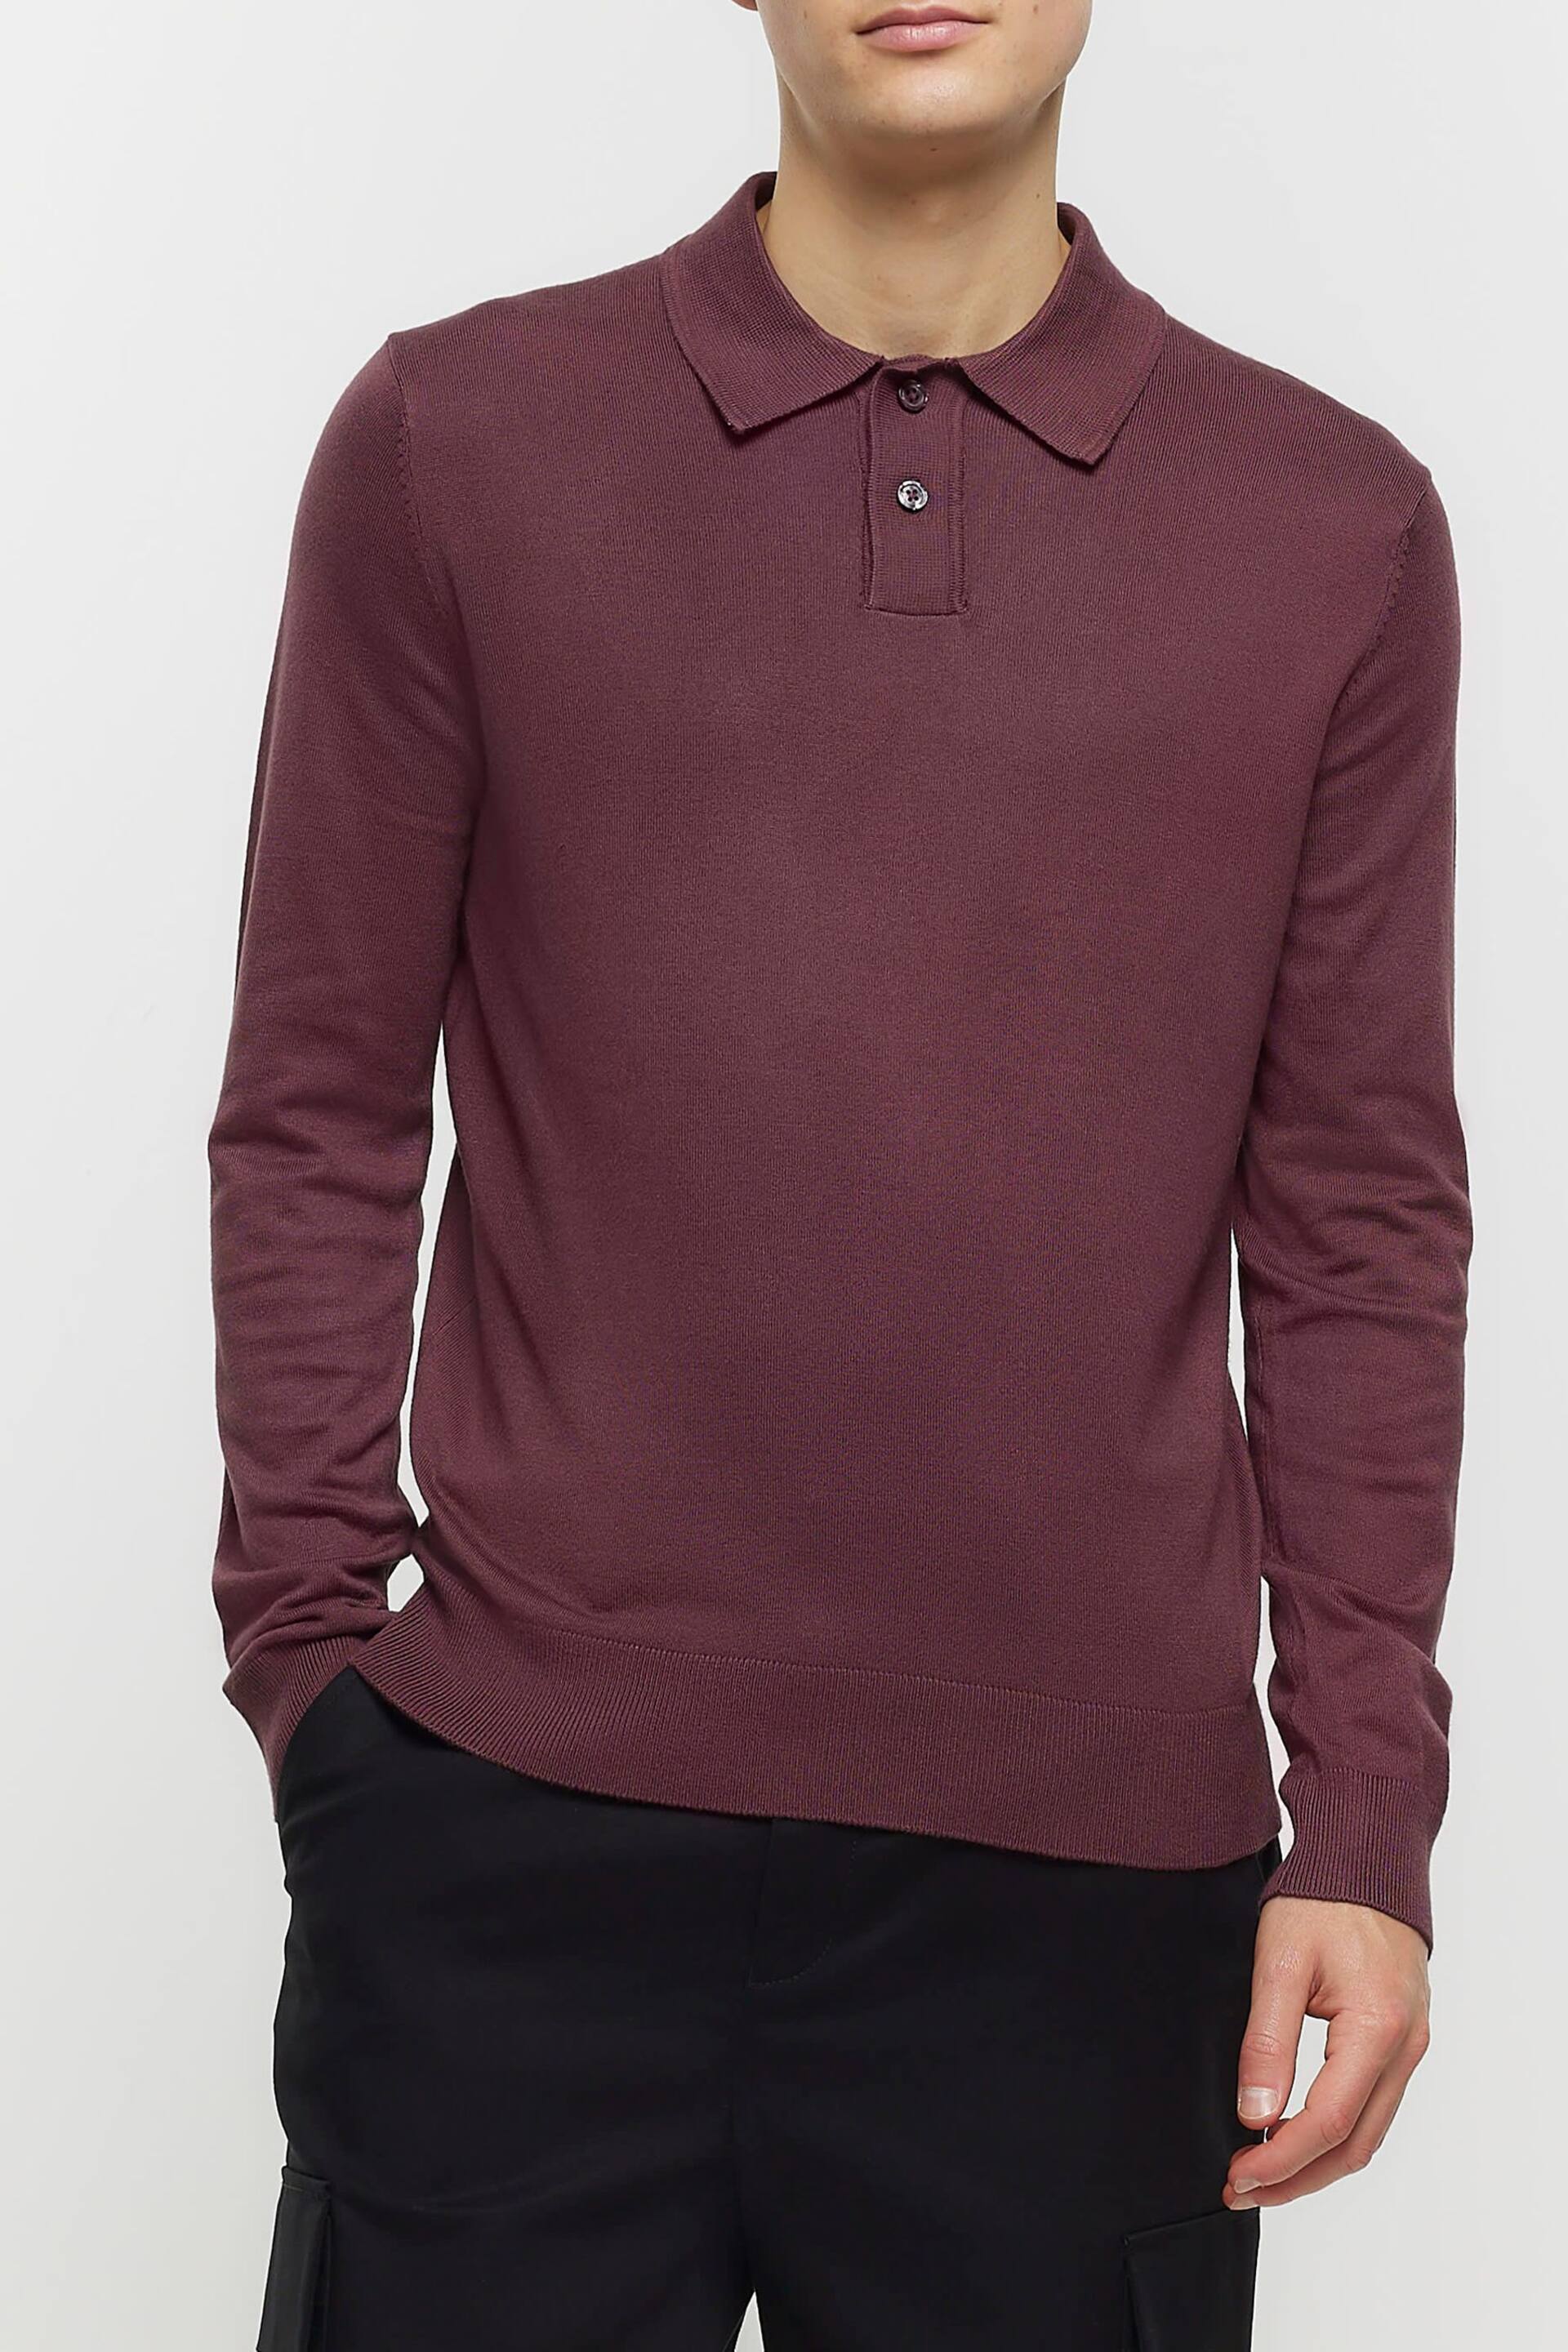 River Island Purple Knitted Polo Jumper - Image 1 of 7